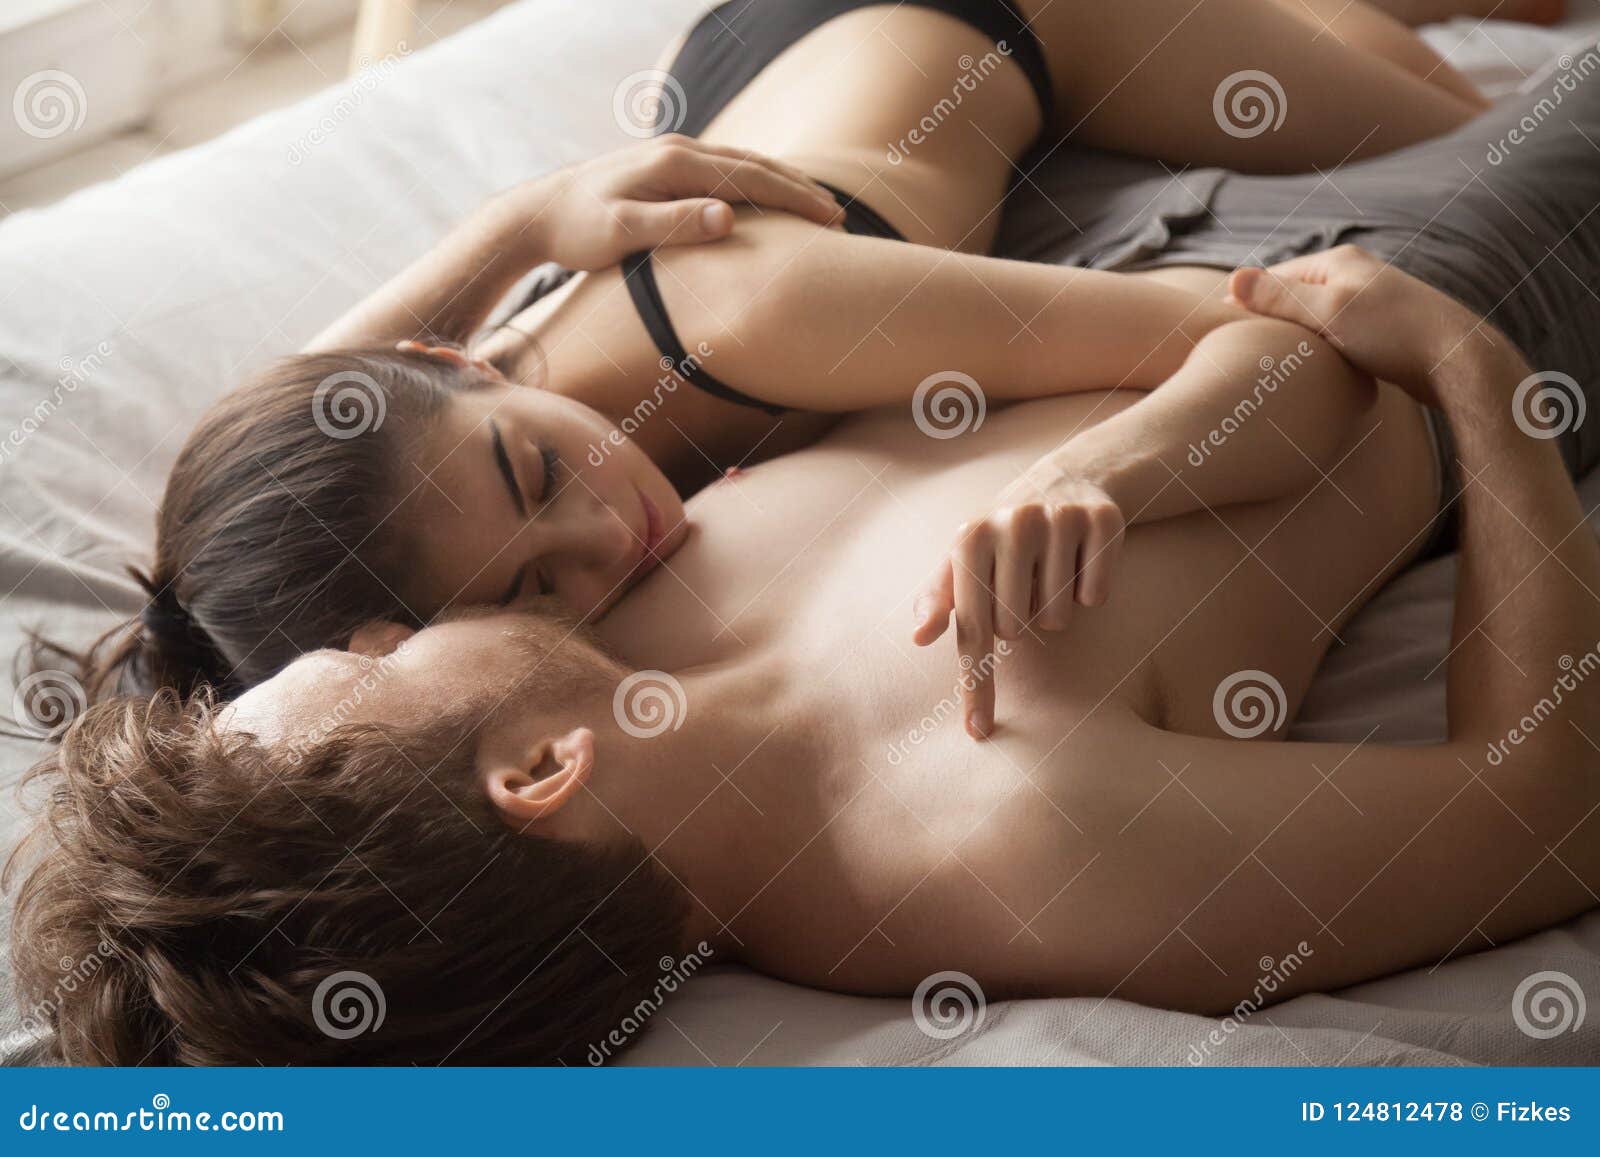 Romantic Couple Lying In Bed Embracing After Love Making Stock Photo 124812478 image